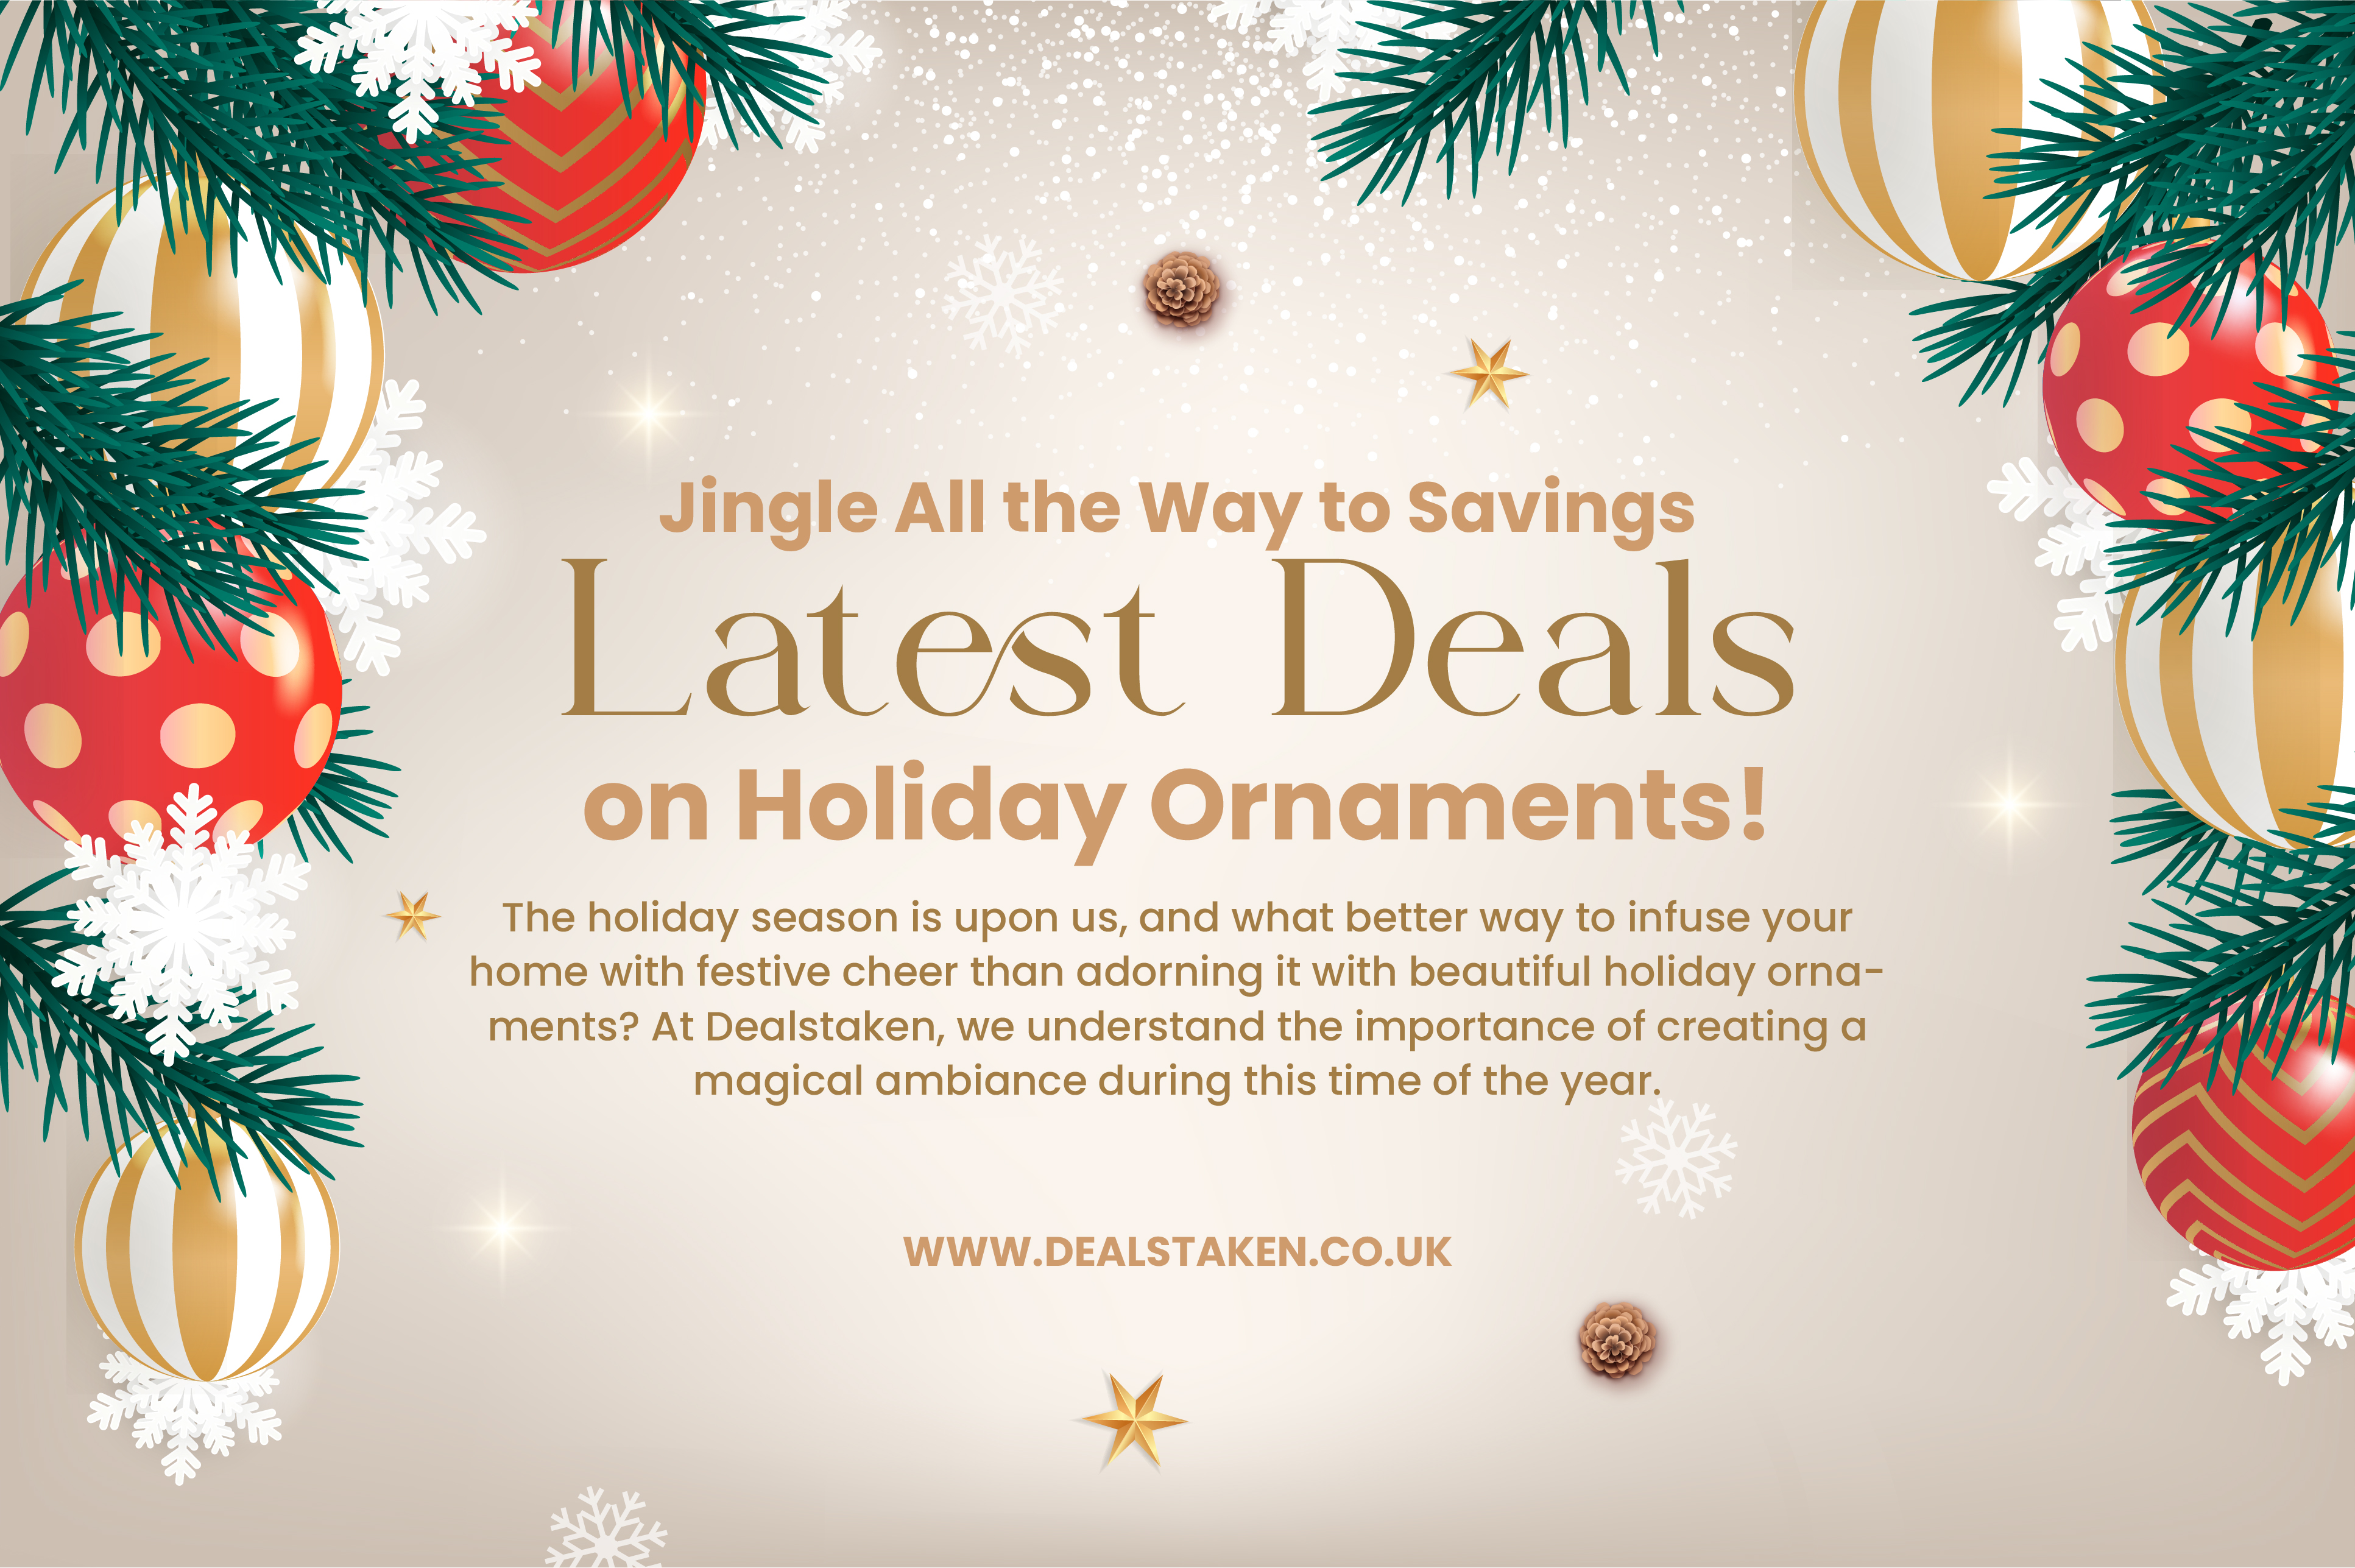 jingle-all-the-way-to-savings-latest-deals-on-holiday-ornaments